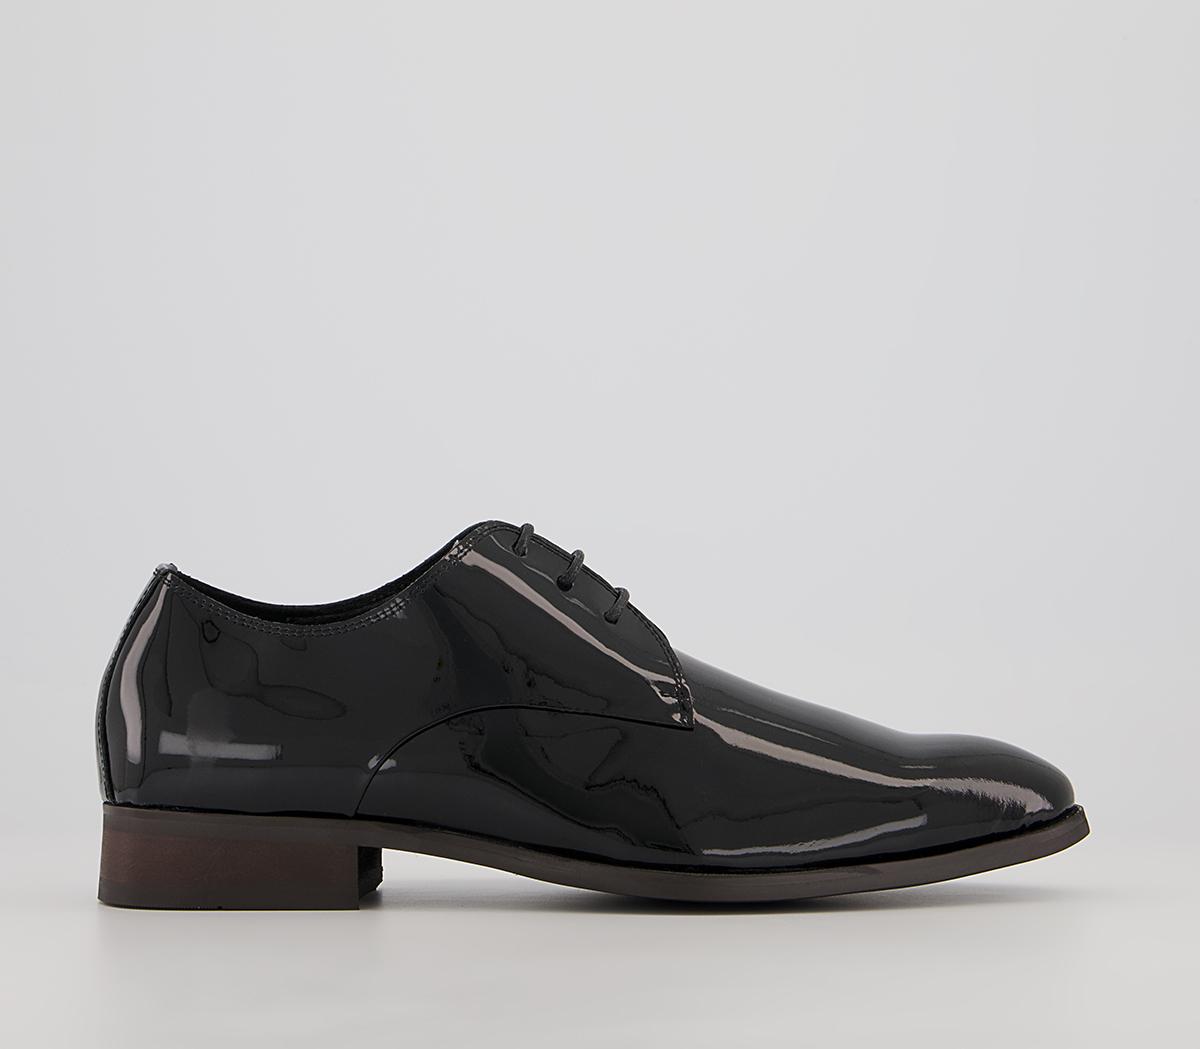 OfficeMiguel Three Eye Derby ShoesBlack Patent